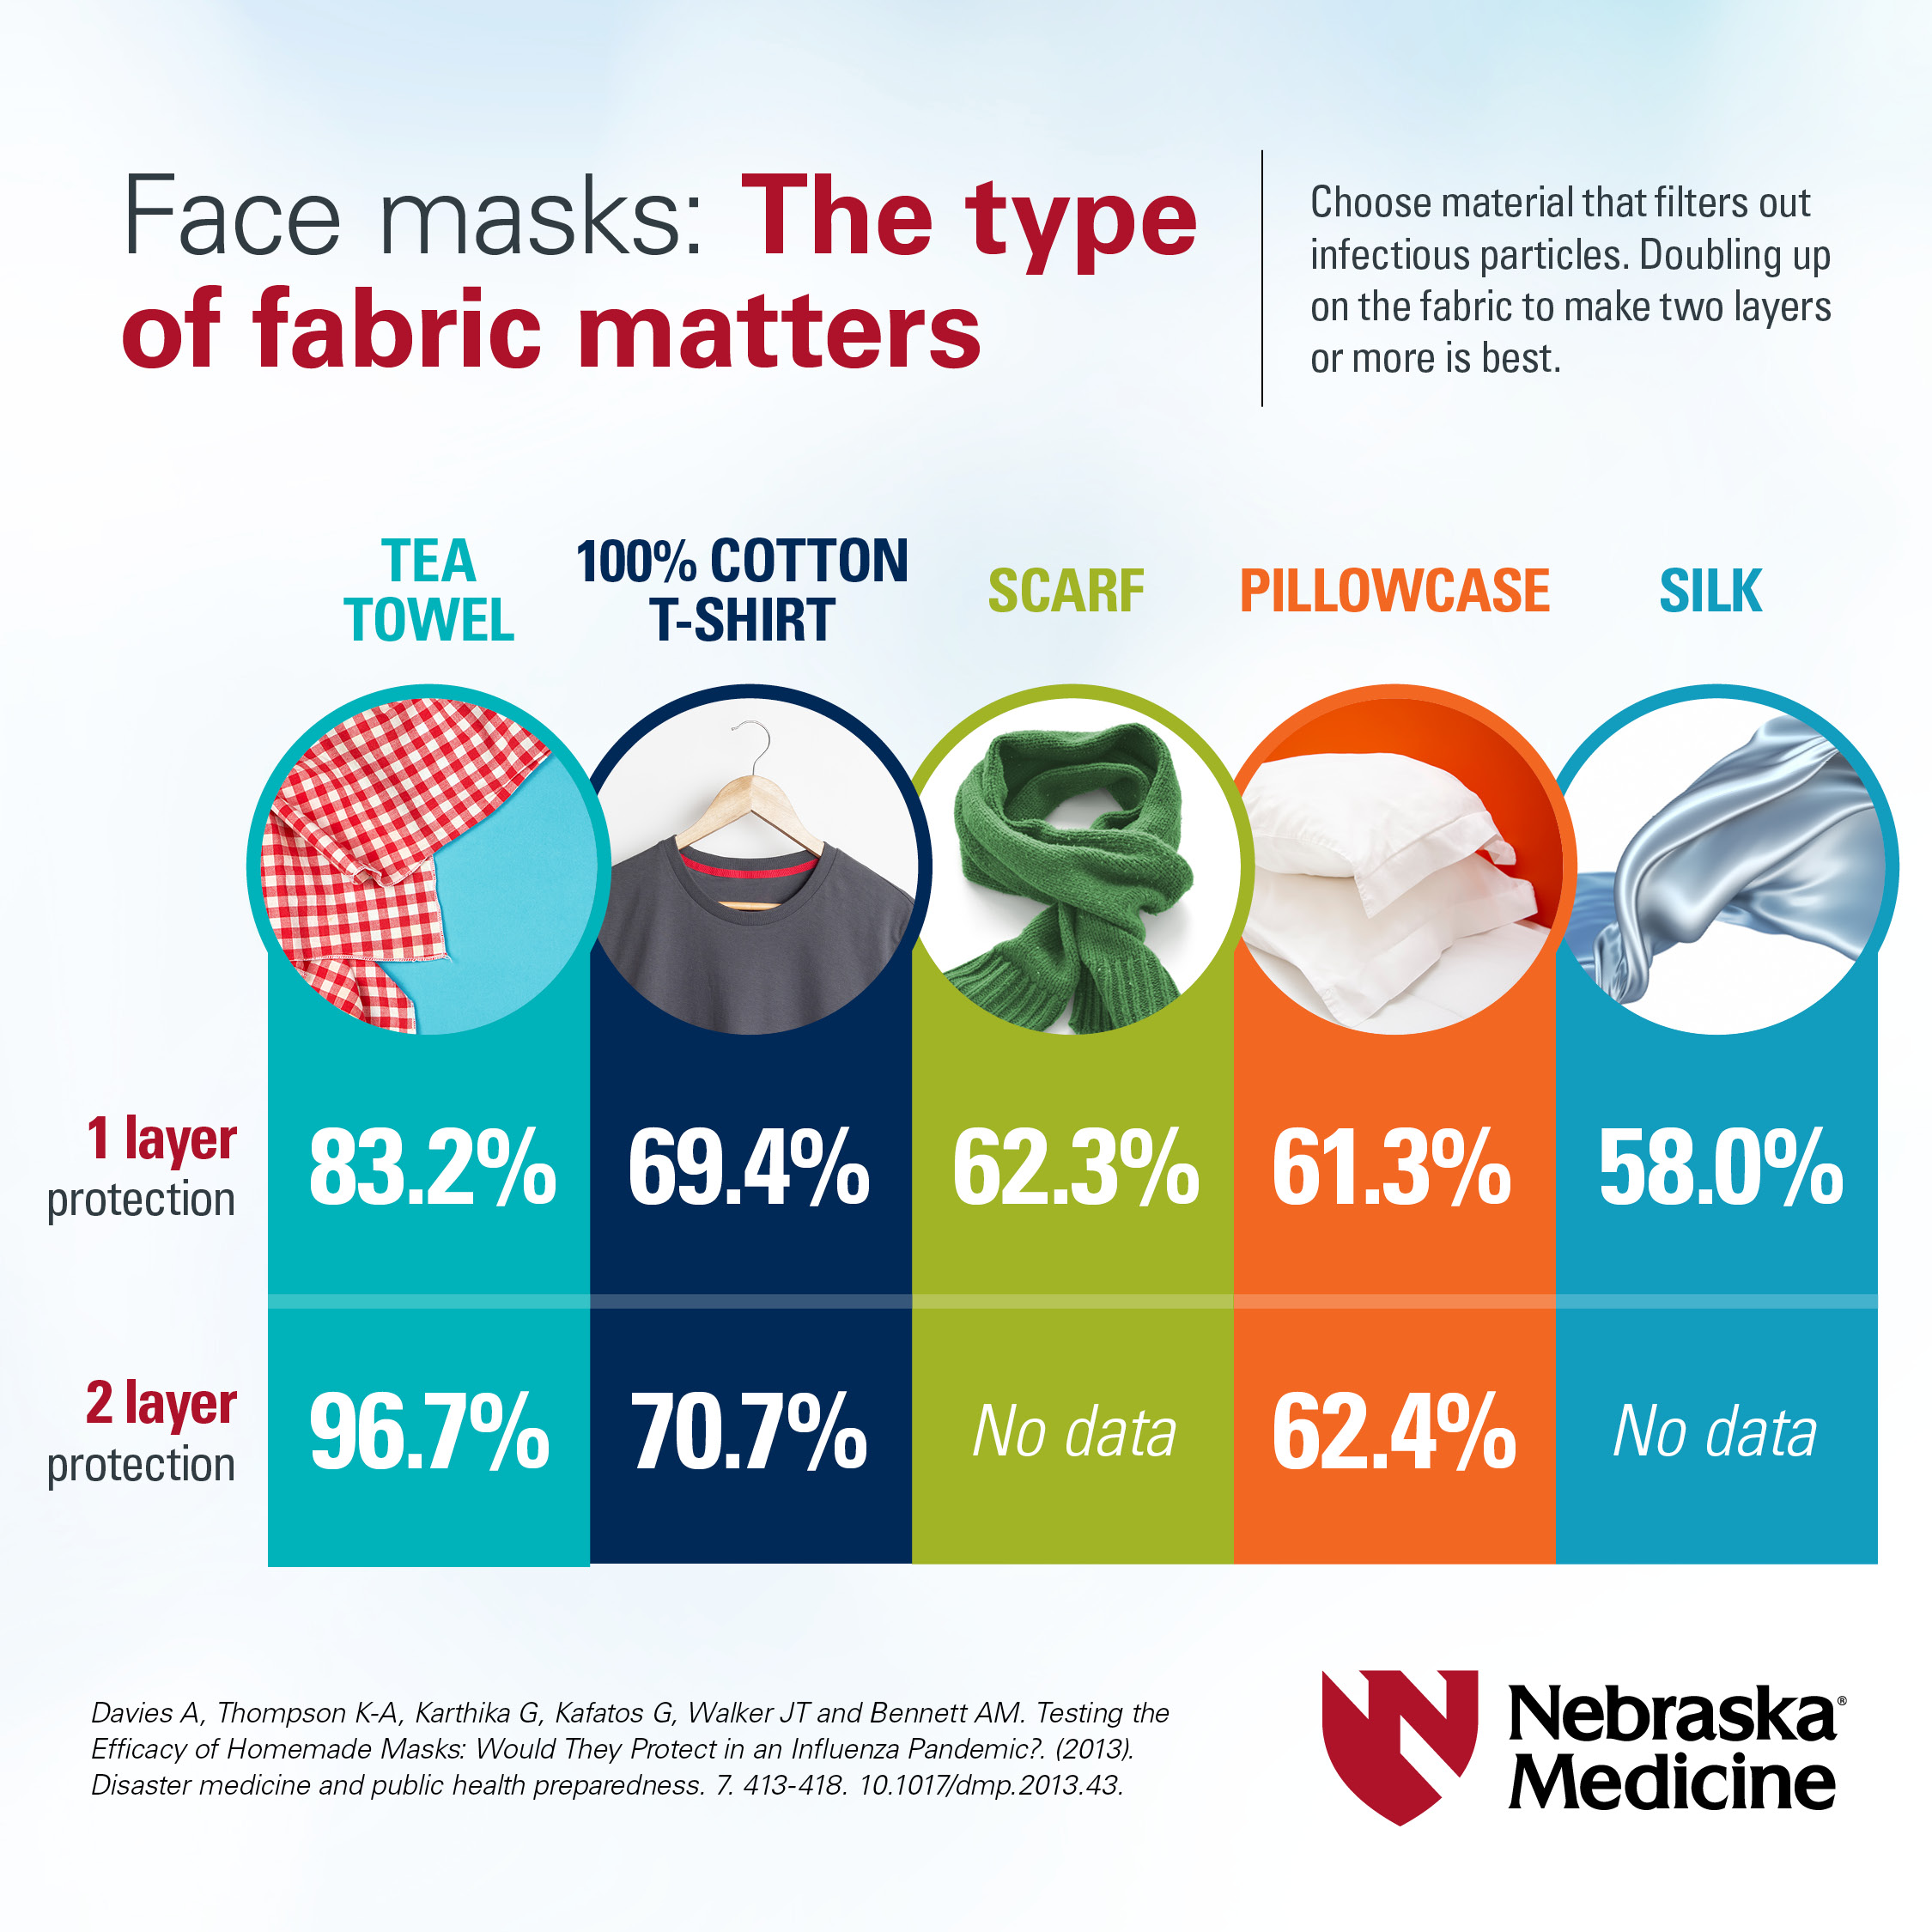 The best mask material according to scientists